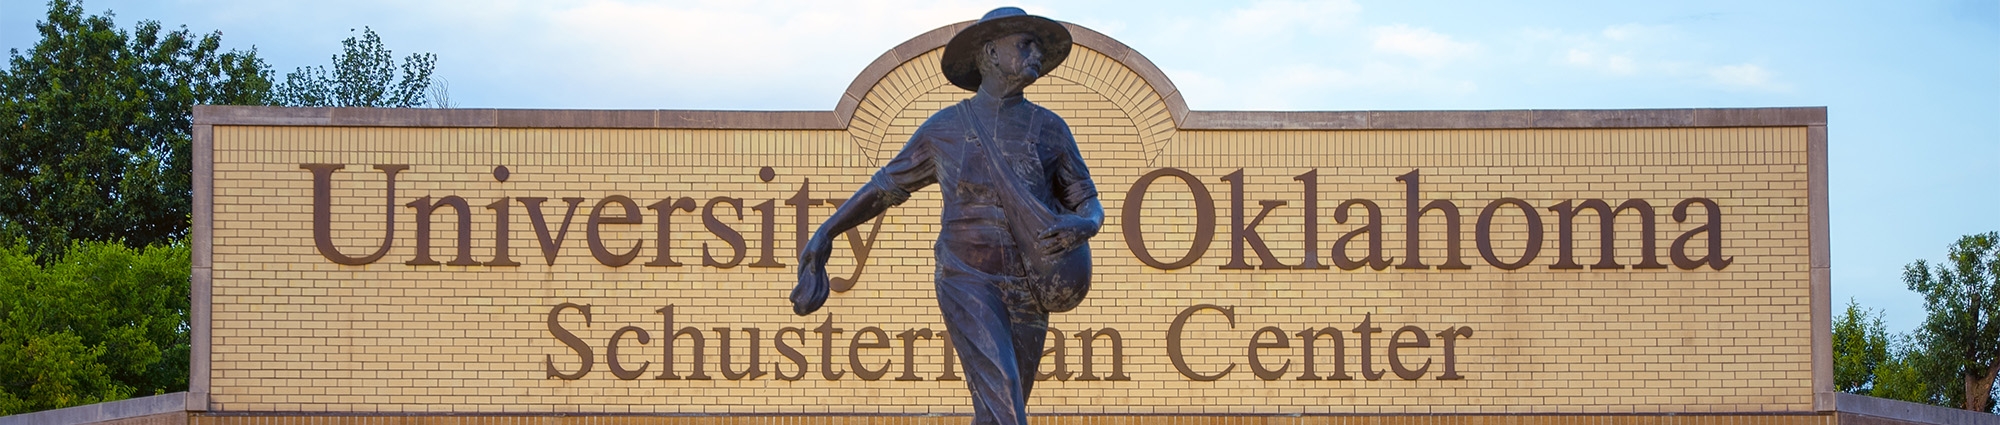 A statue of the OU Seed Sower, a figure in a wide brimmed hat with an arm extended behind him. In the background, a brick sign for the University of Oklahoma Schusterman Center.